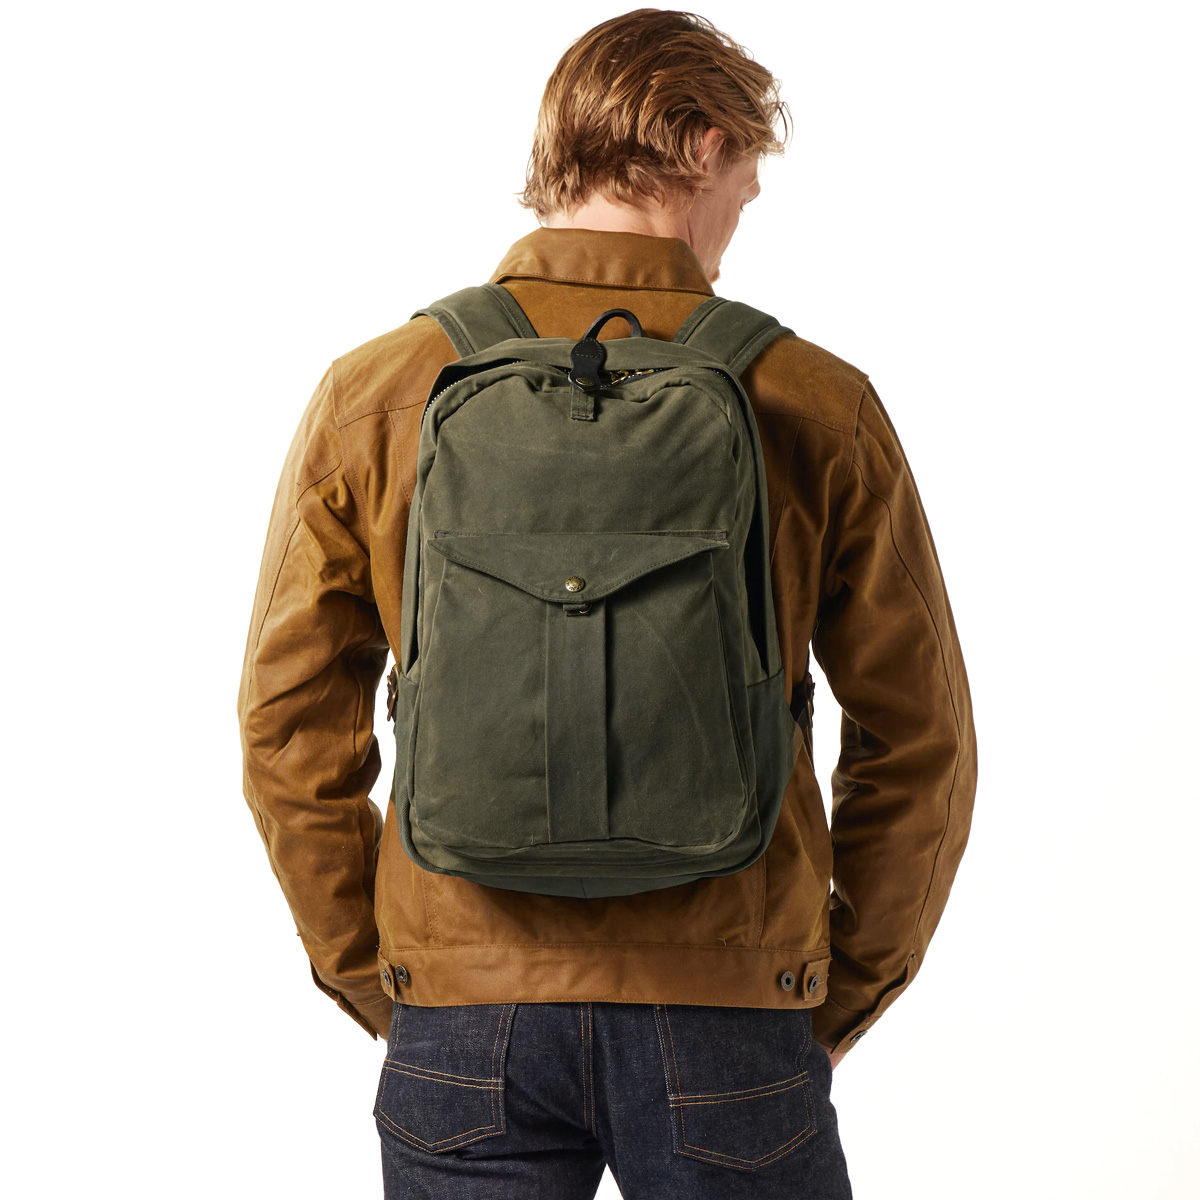 Filson Journeyman Backpack 20231638 Otter Green, the best backpack for your vintage outfit